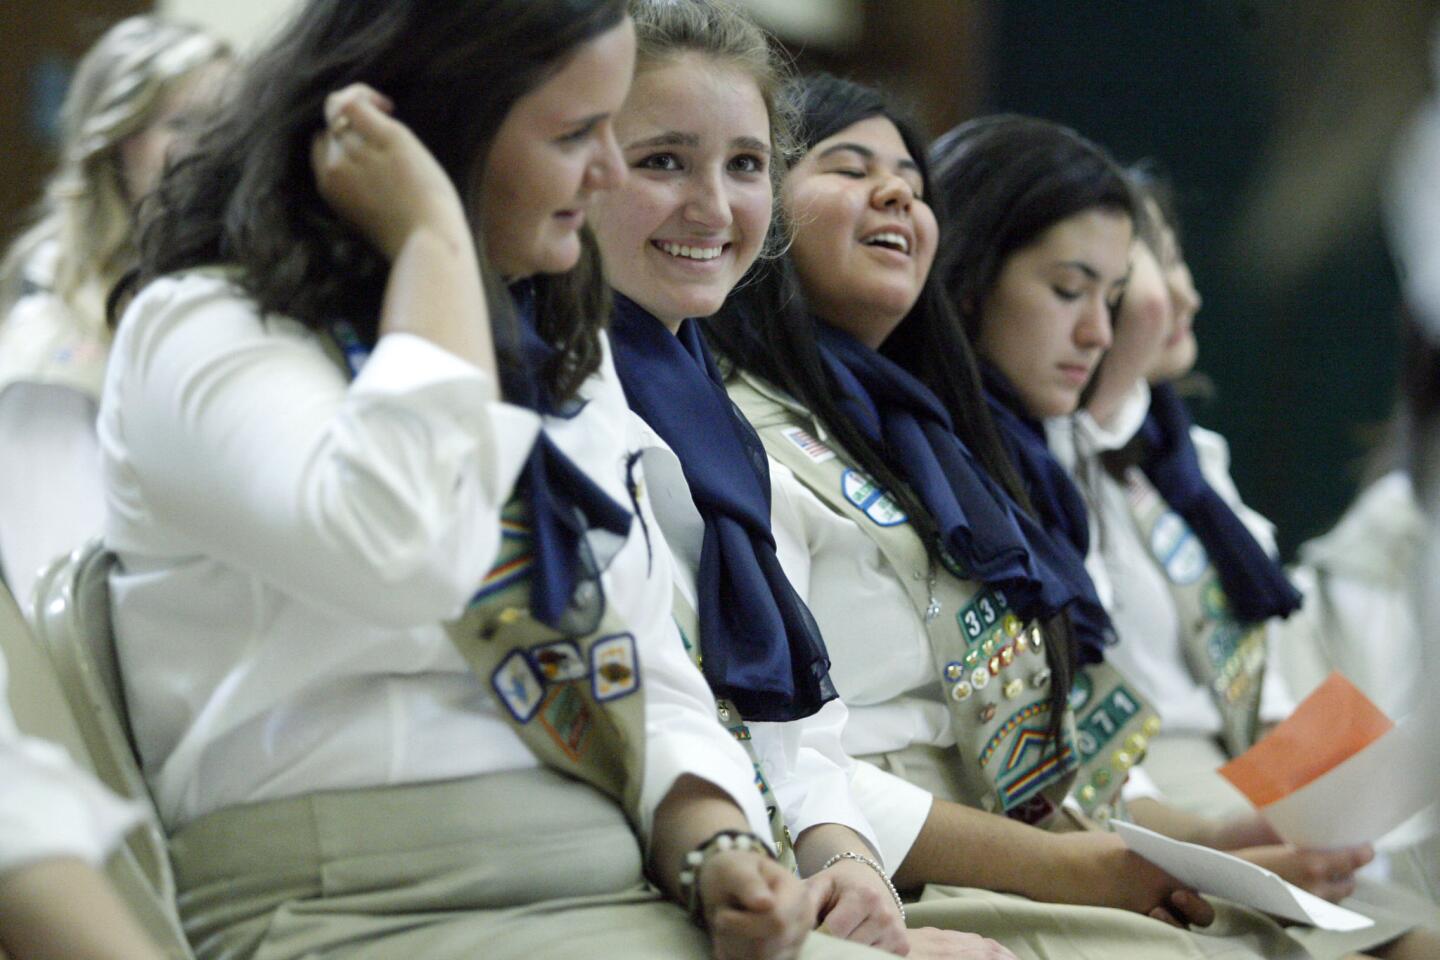 Courney De Paoli, 18, listens to speeches during rehearsal for Girl Scout Gold Awards, which took place at the Latter-day Saints church in La Canada on Friday, May 10, 2013. (Cheryl A. Guerrero/Staff photographer)